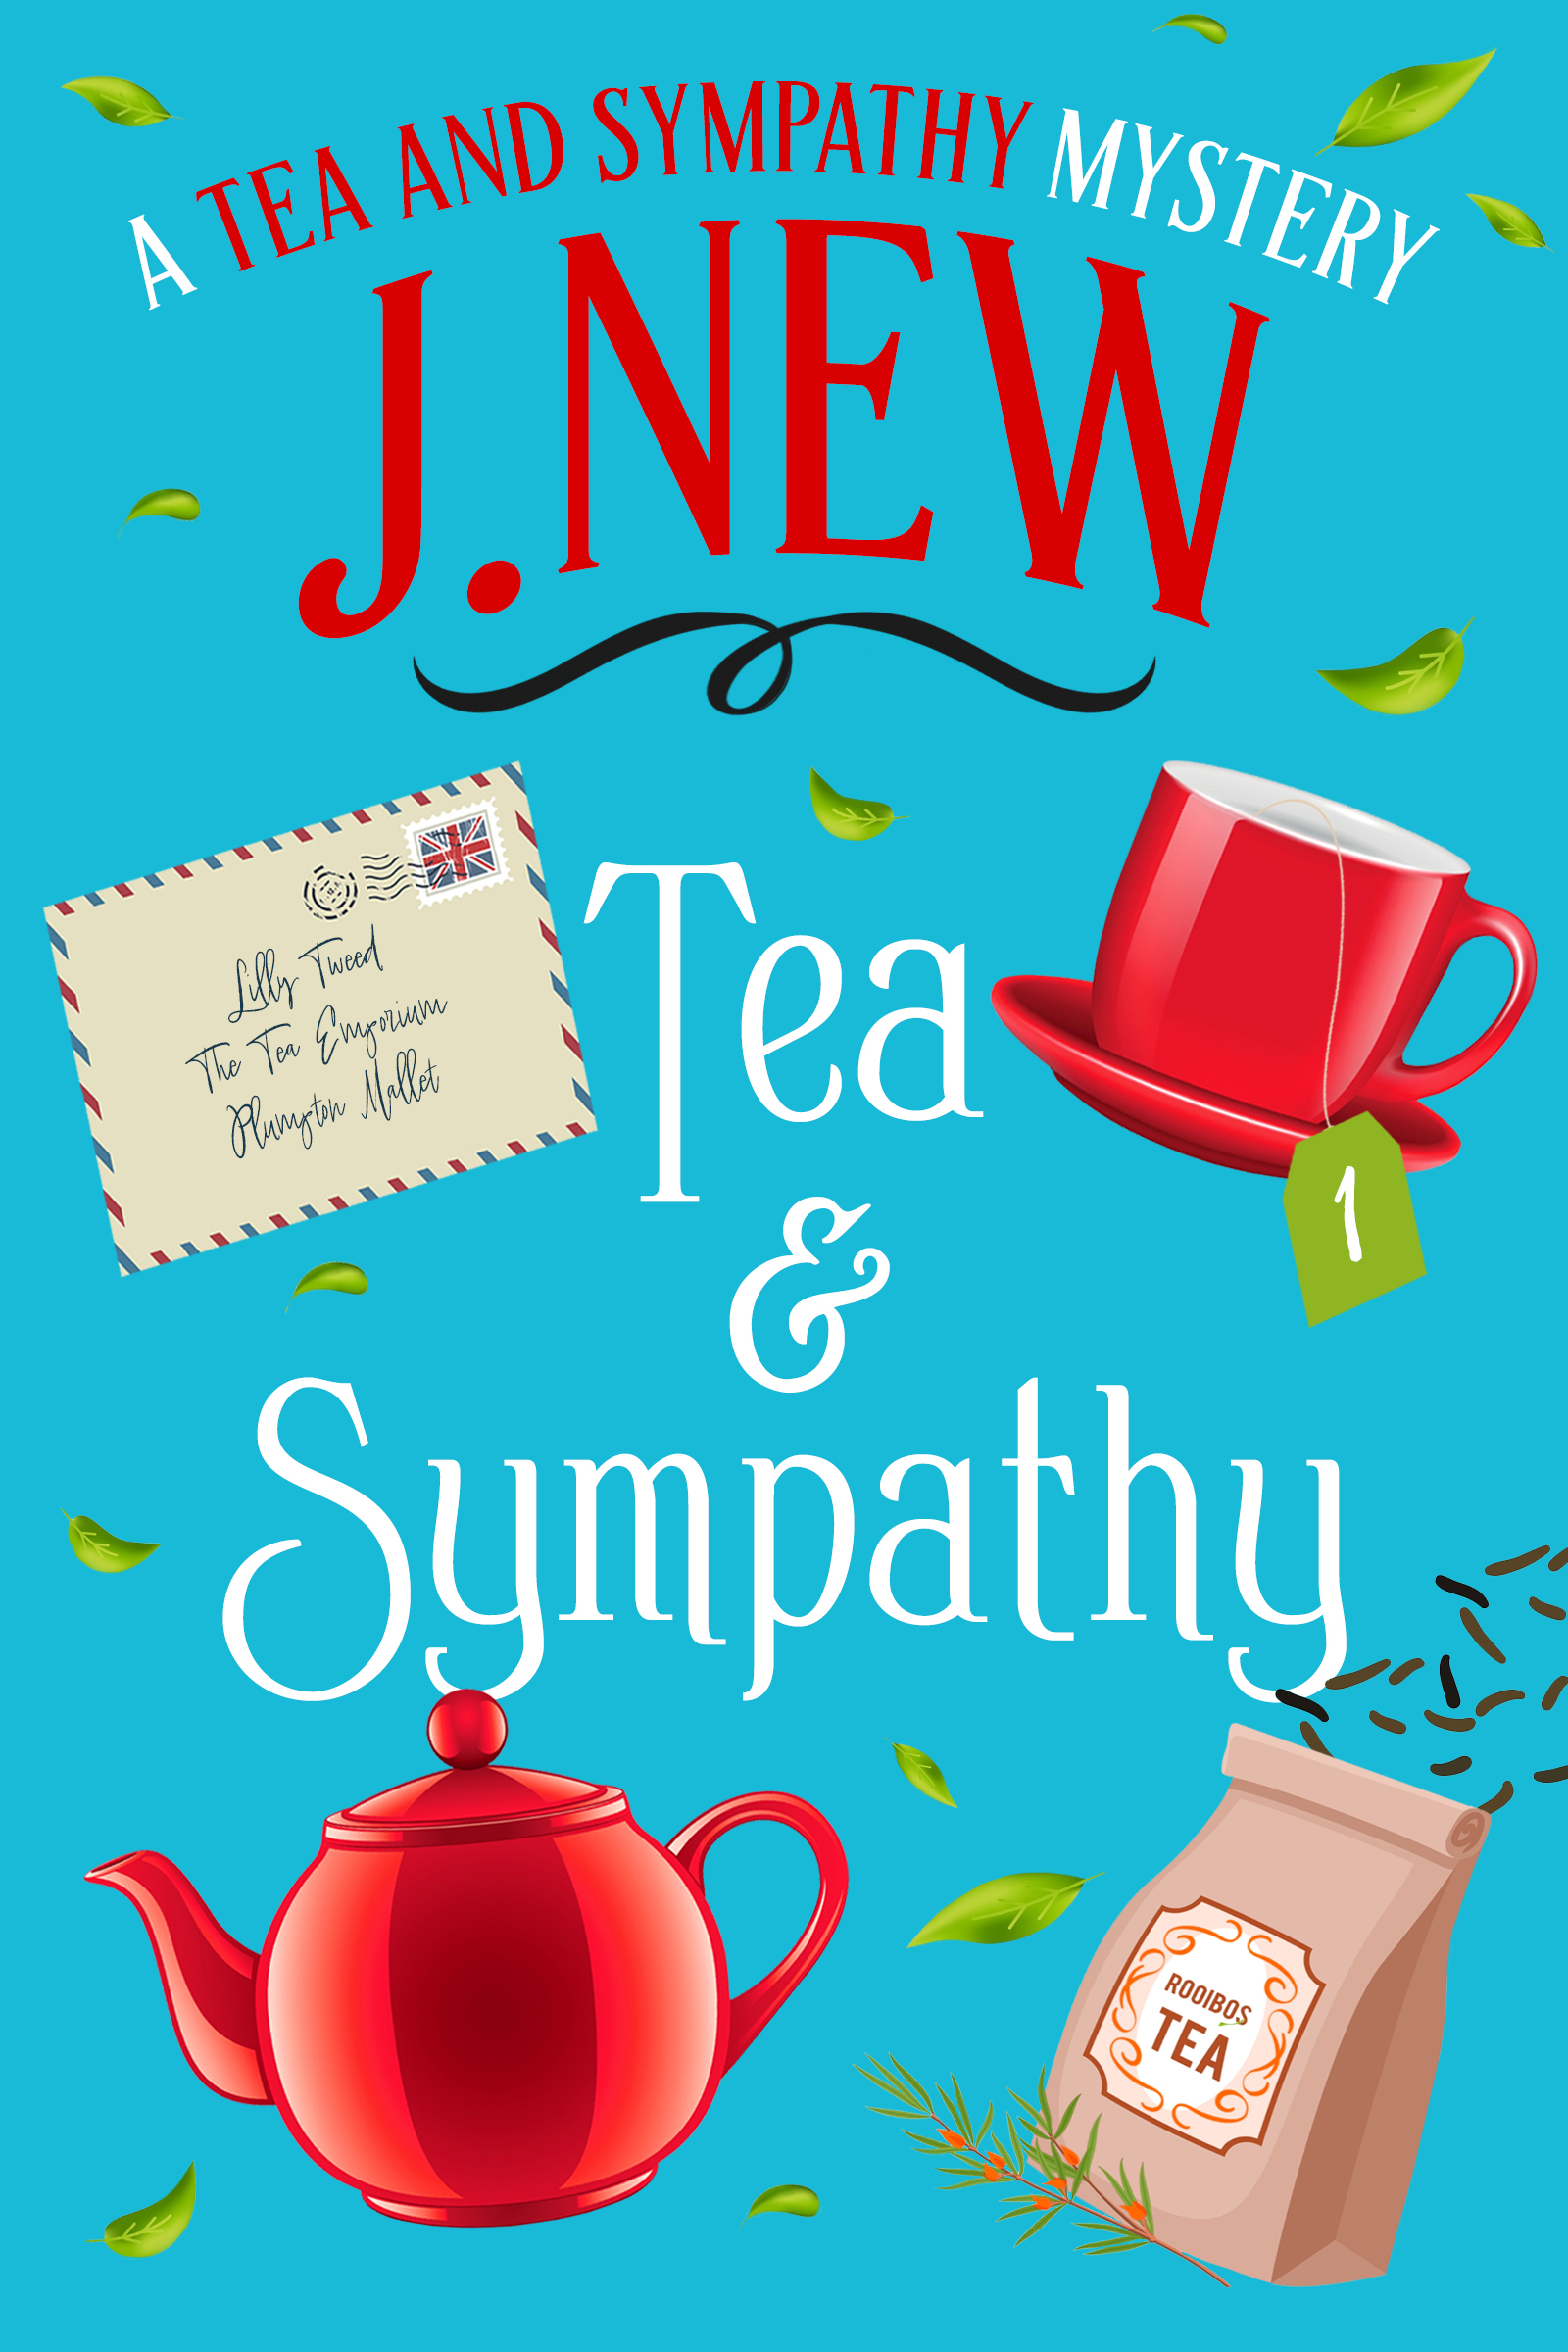 Tea and Sympathy the first book in the popular British culinary cozy mystery series of the same name featuring former agony aunt advice columnist, now purveyor of fine teas and accidental sleuth, Lilly Tweed.